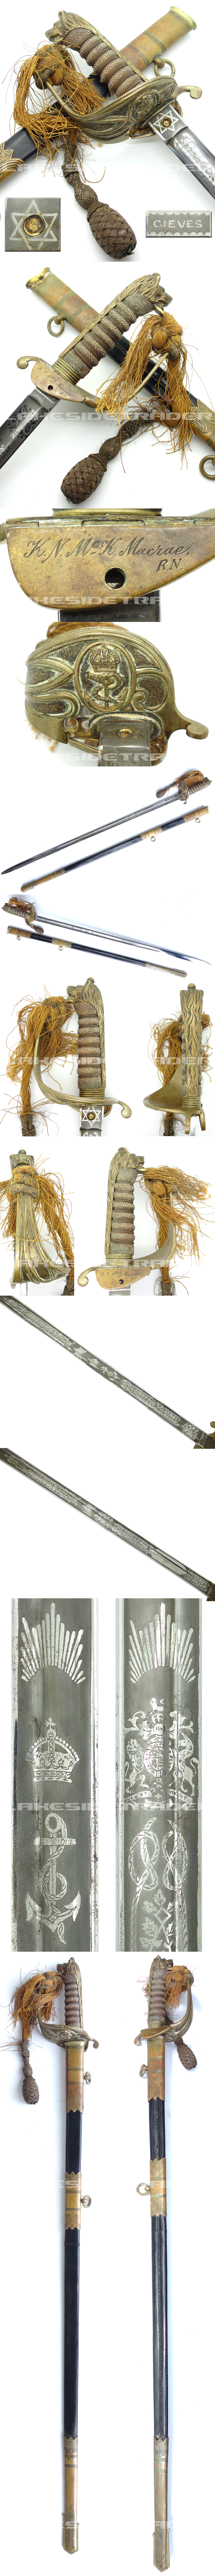 Named - 1827 Pattern Royal Navy Officers Sword by Gieves